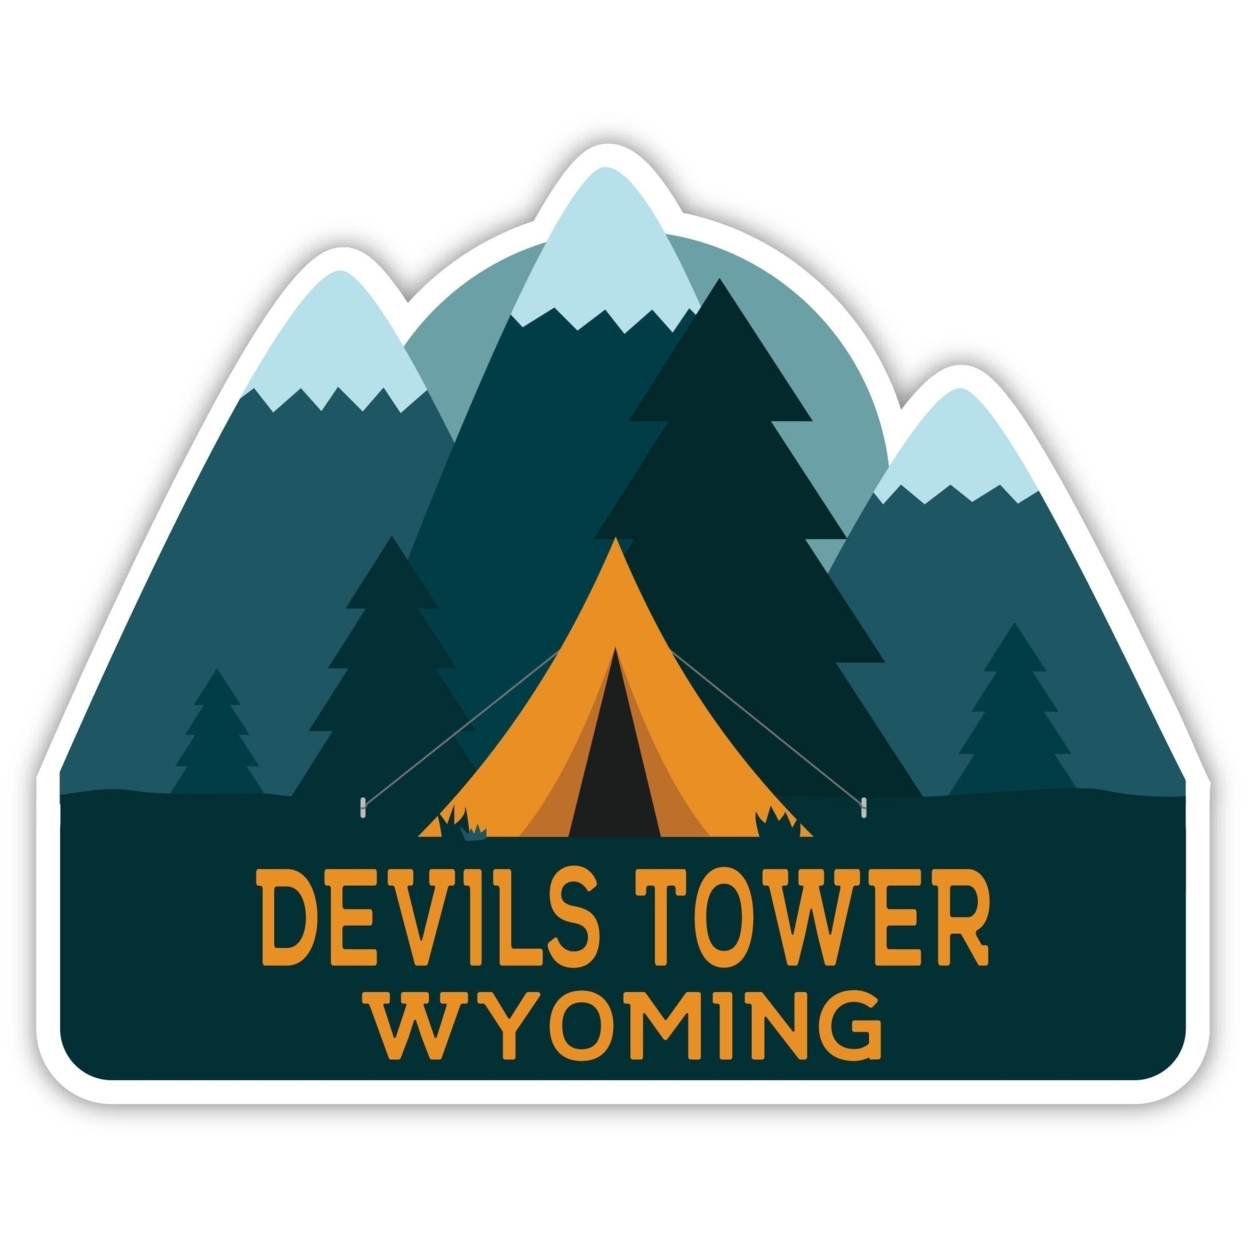 Devils Tower Wyoming Souvenir Decorative Stickers (Choose Theme And Size) - 4-Pack, 12-Inch, Great Outdoors